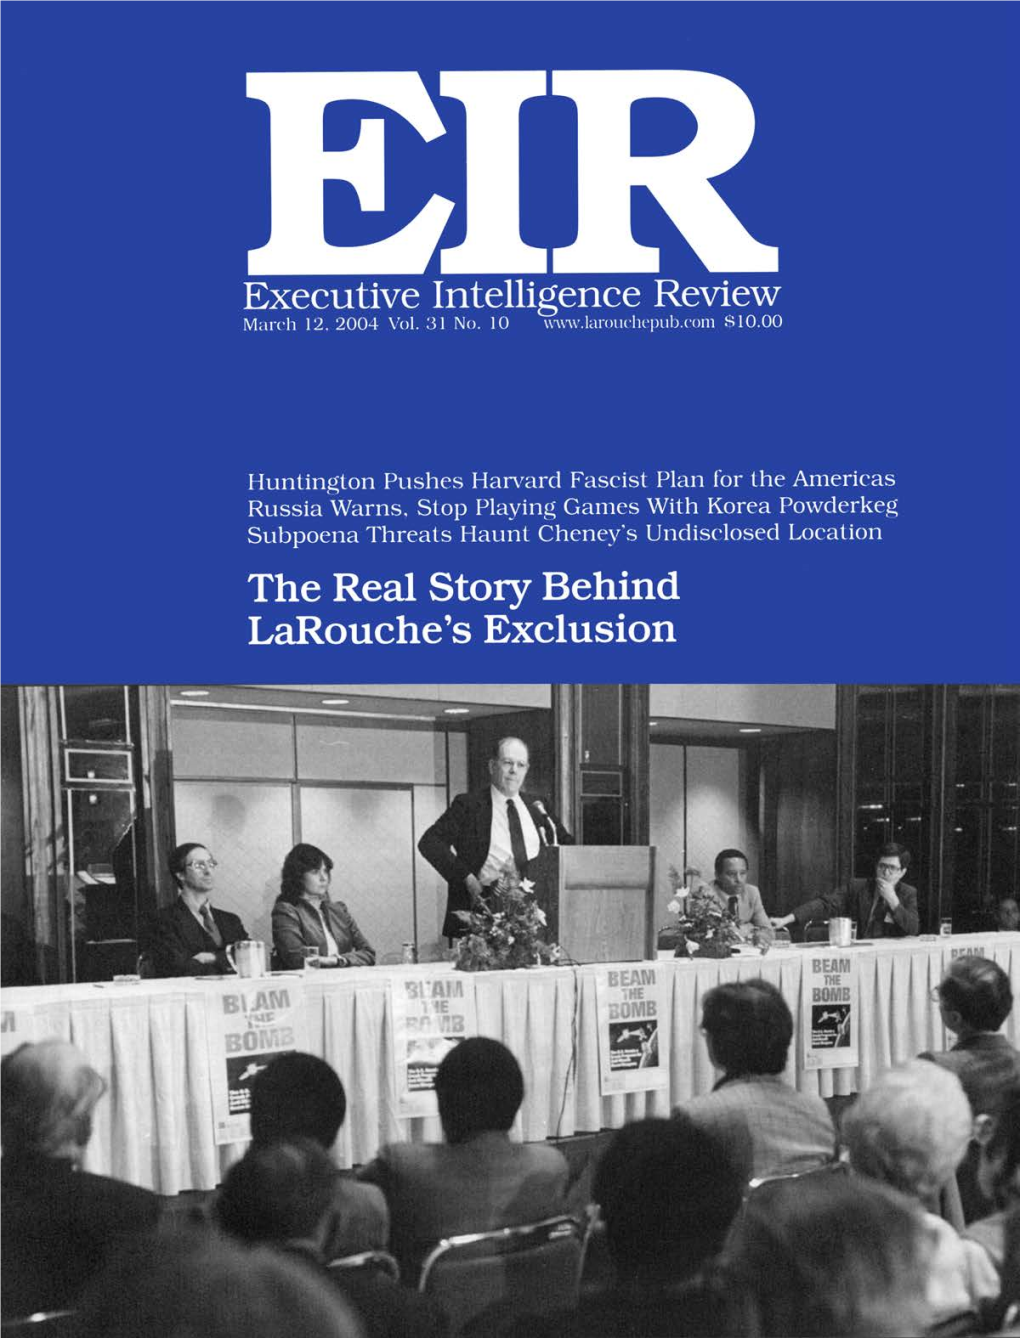 Executive Intelligence Review, Volume 31, Number 10, March 12